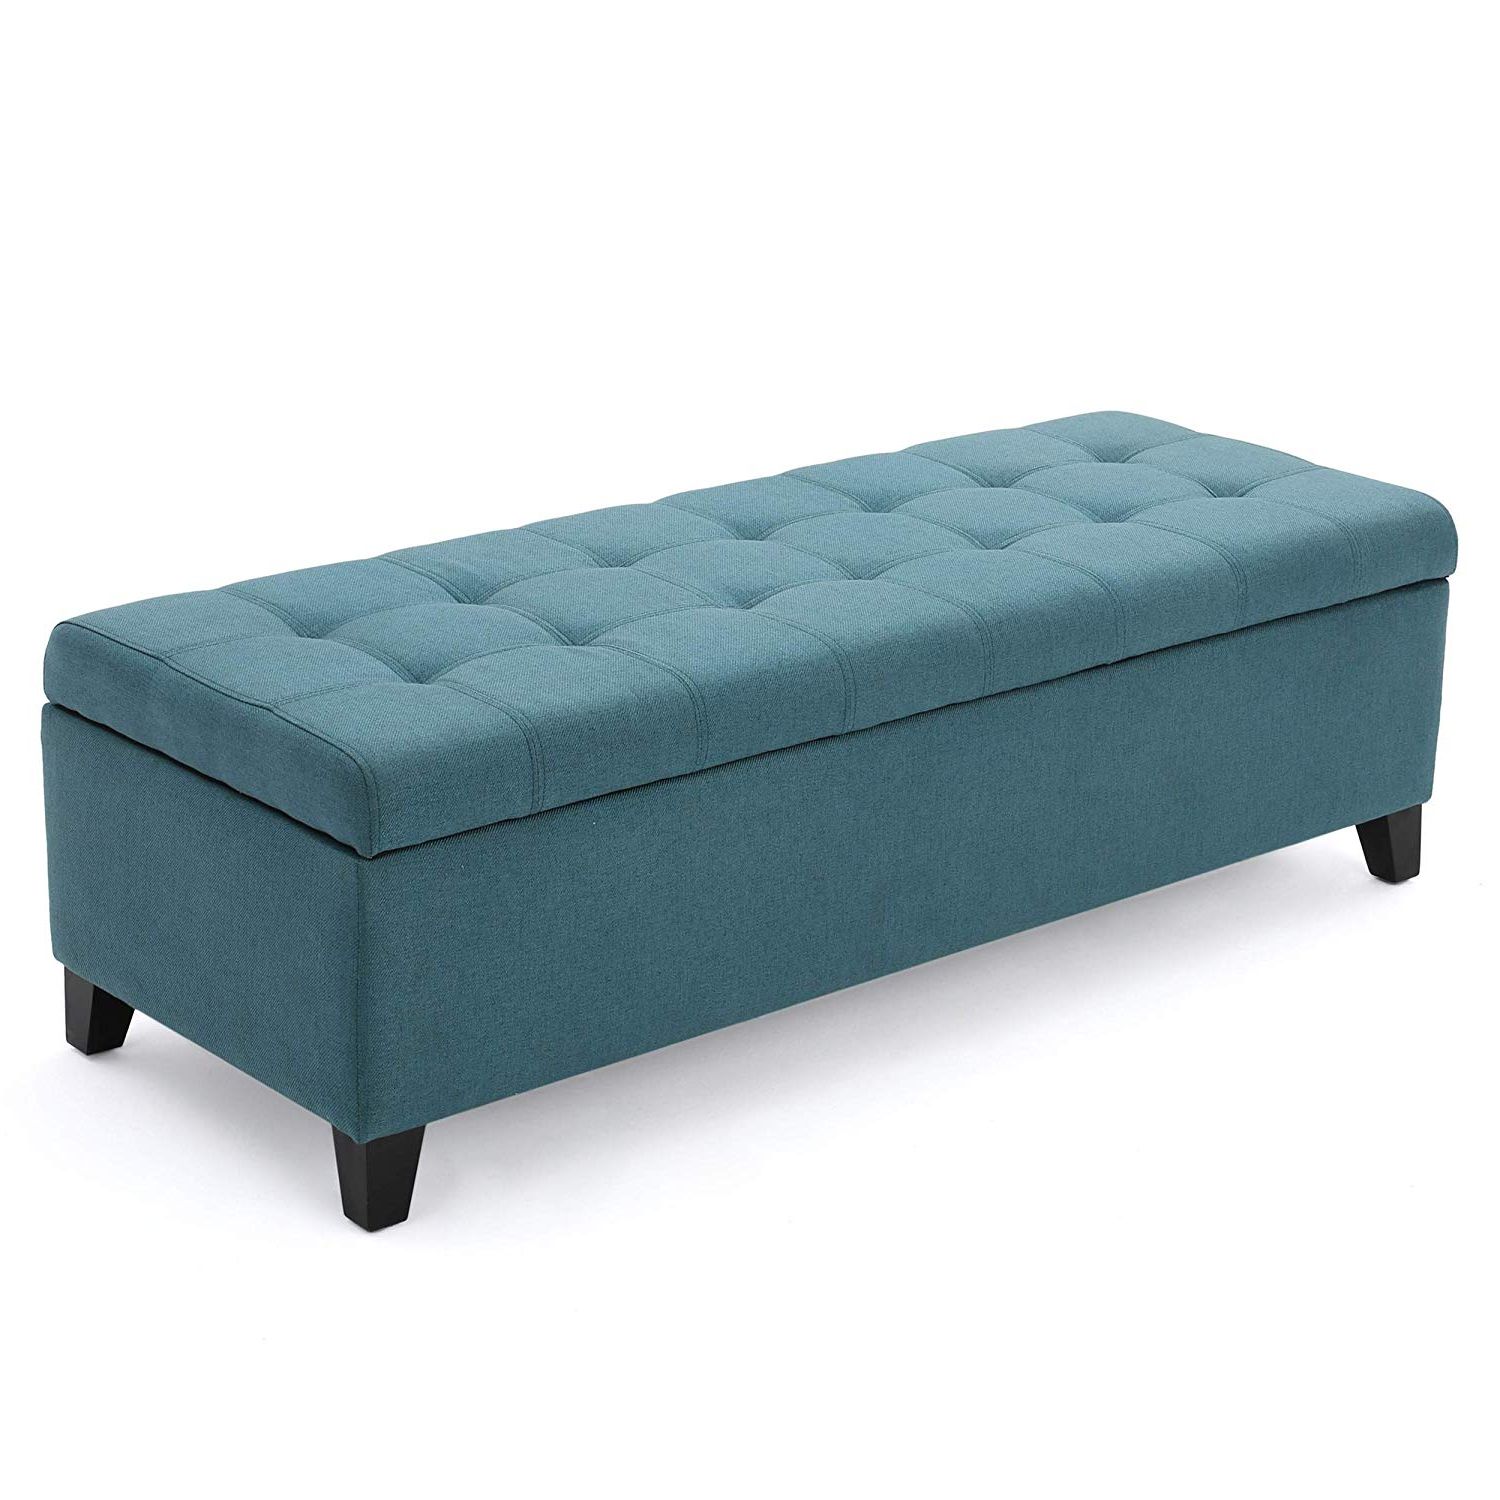 Fashionable Christopher Knight Home 299866 Living Sterling Dark Teal Fabric Storage Inside Fabric Storage Ottomans (View 5 of 10)